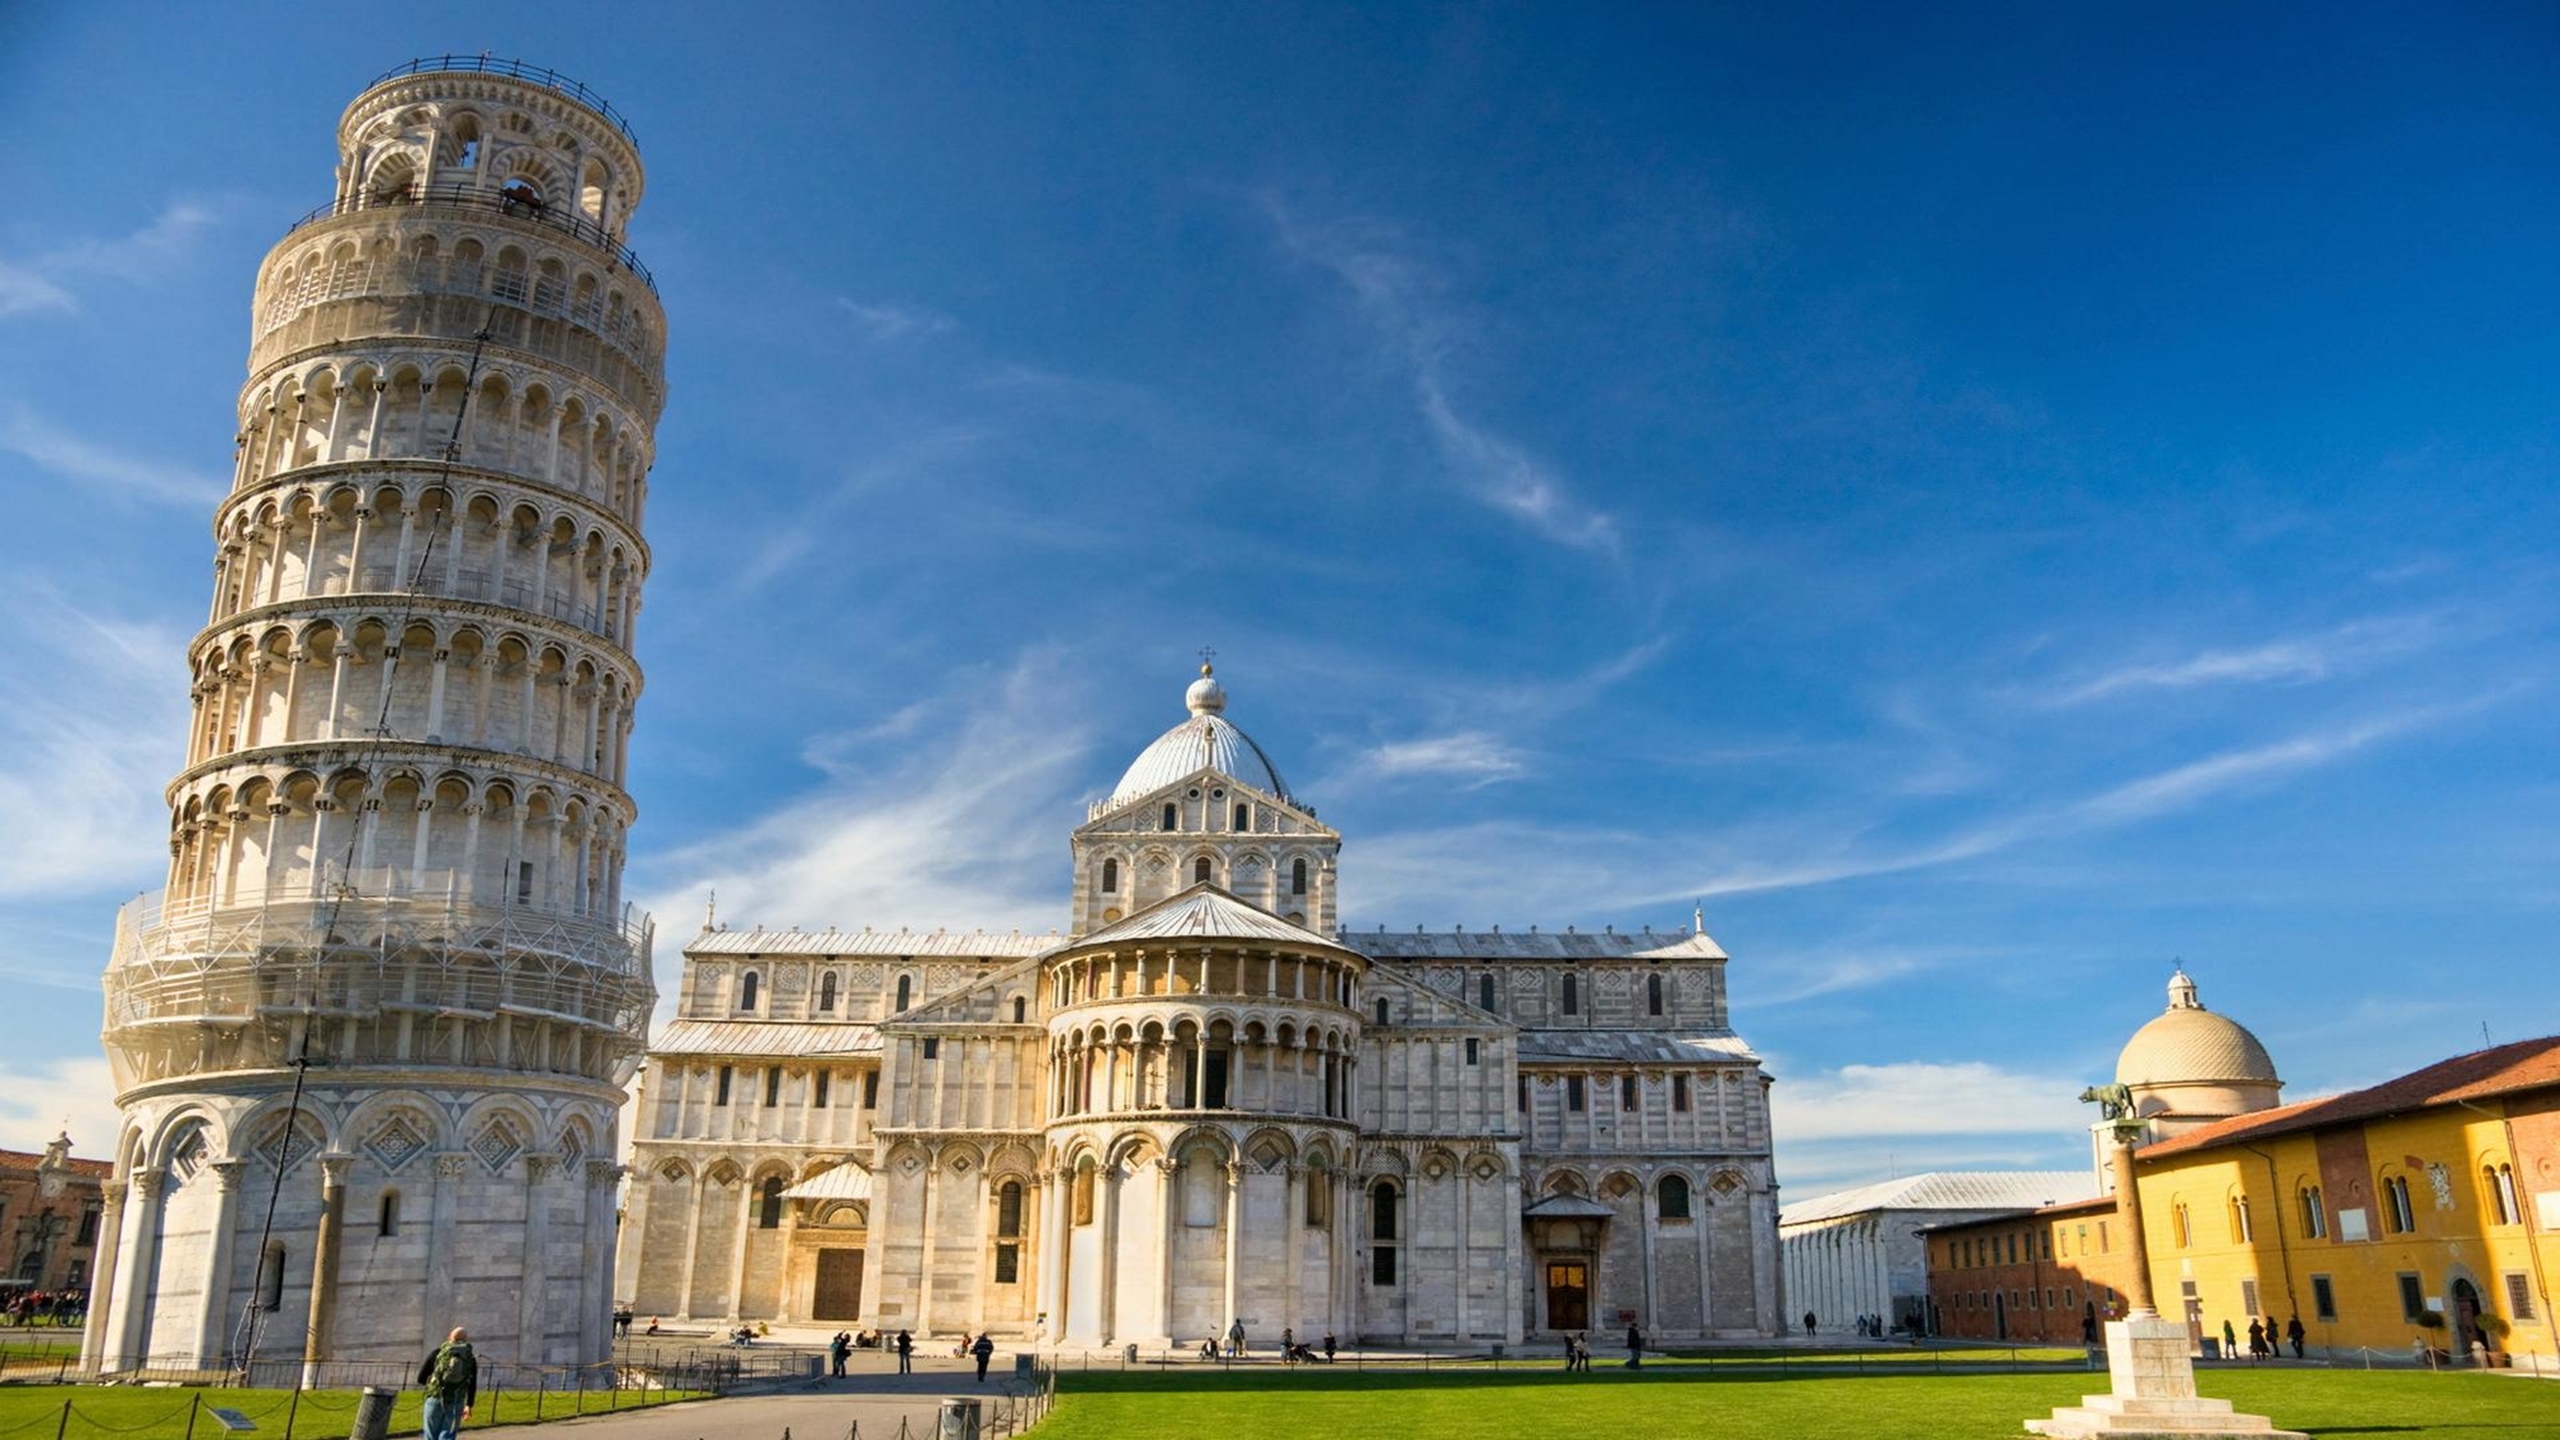 Leaning Tower Of Pisa Italy 10 : Wallpapers13.com